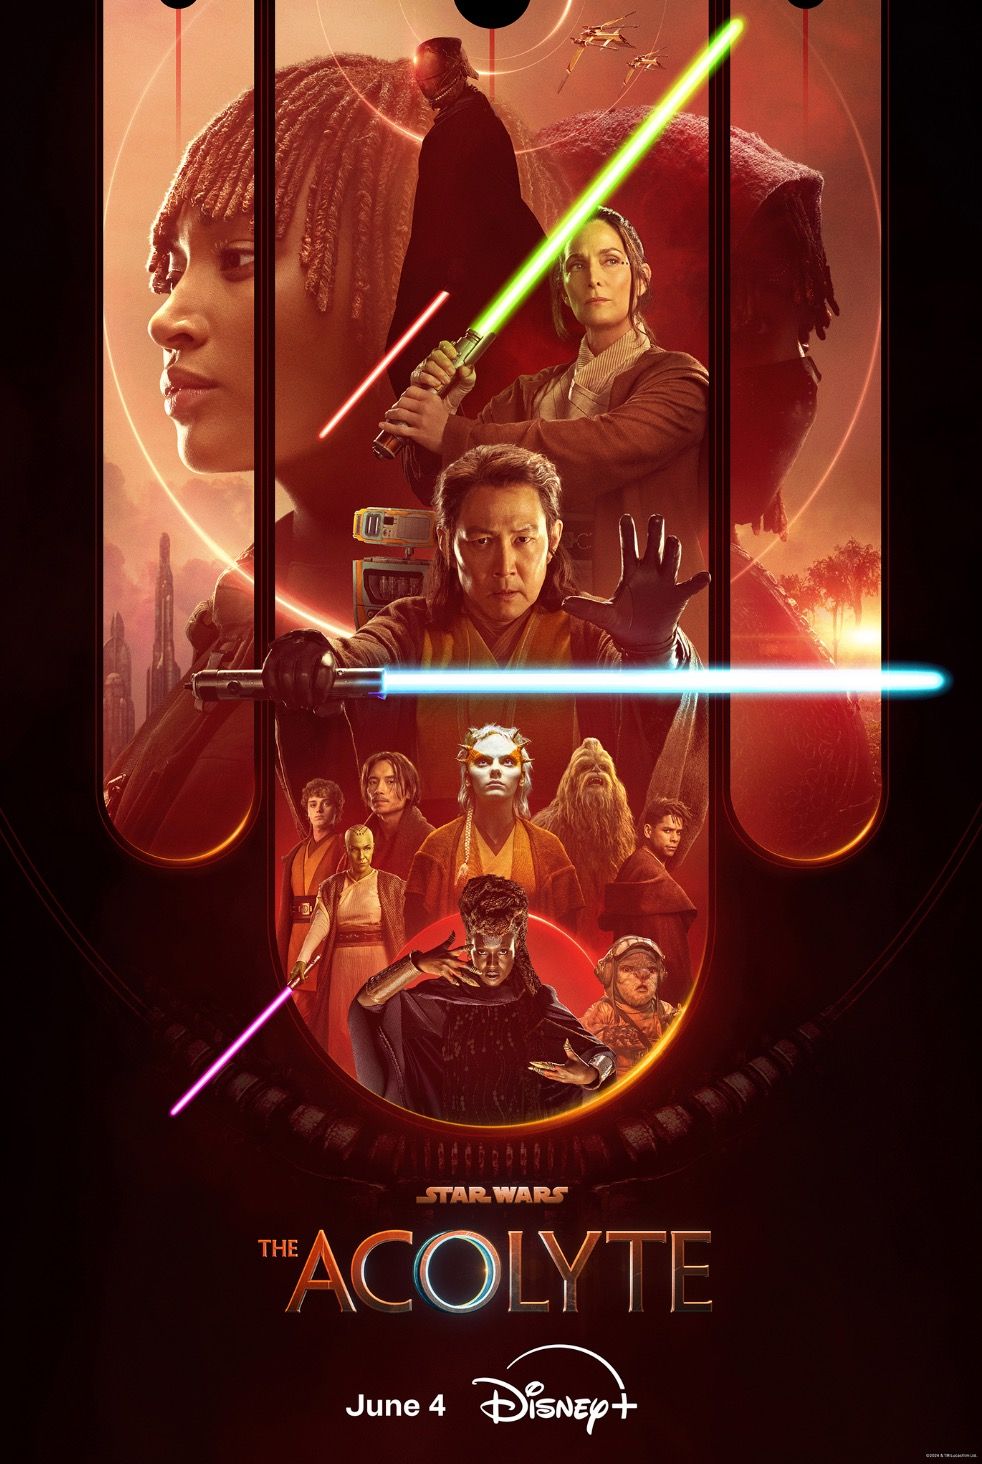 A new poster for The Acolyte showing off the series cast holding lightsabers above the official logo